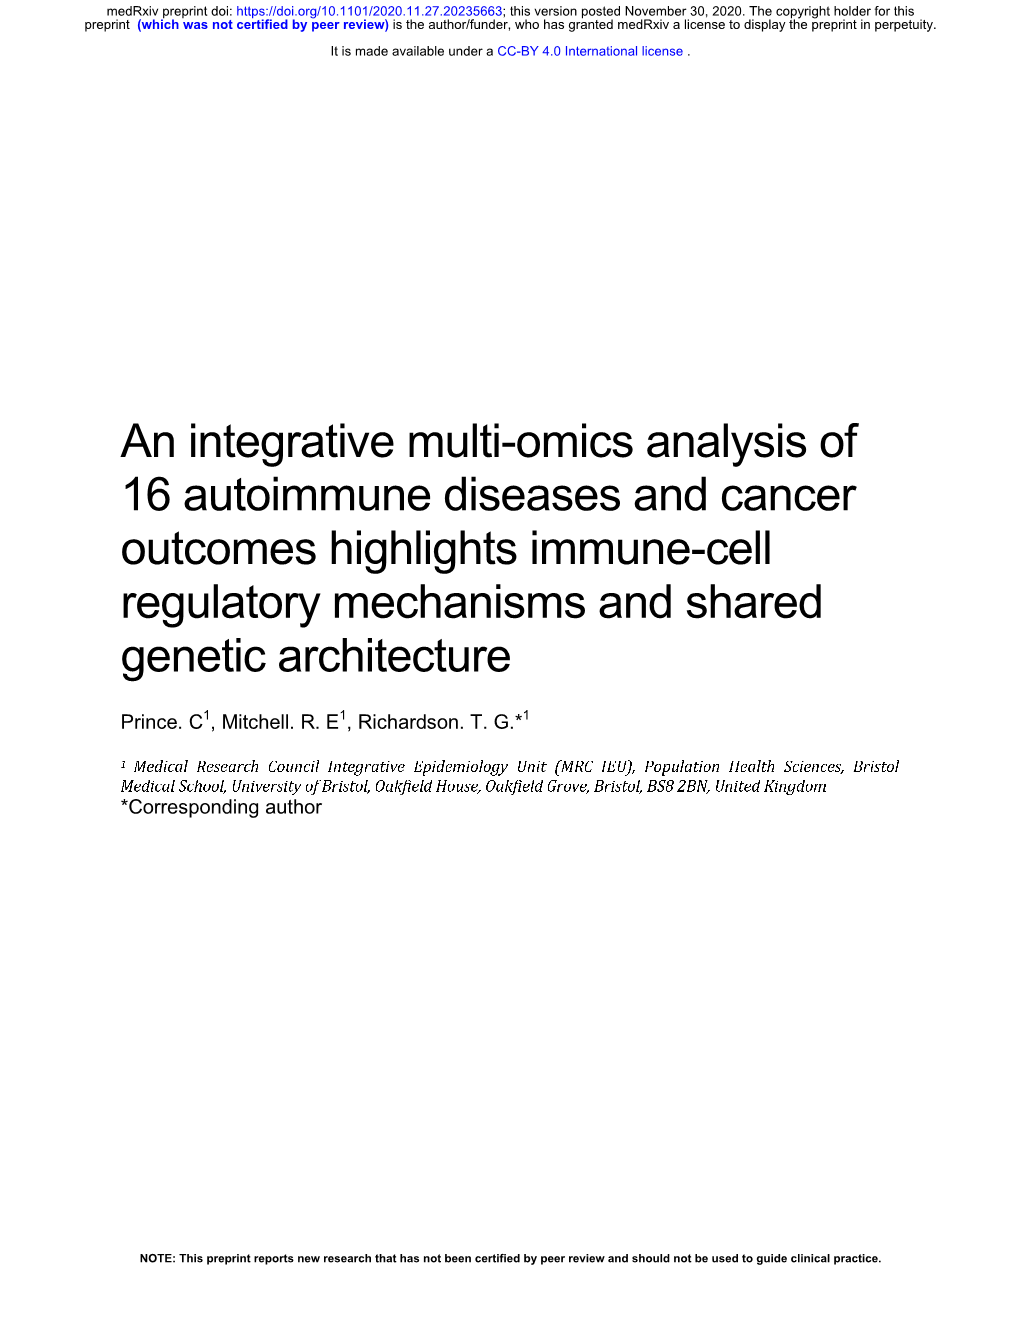 An Integrative Multi-Omics Analysis of 16 Autoimmune Diseases and Cancer Outcomes Highlights Immune-Cell Regulatory Mechanisms and Shared Genetic Architecture